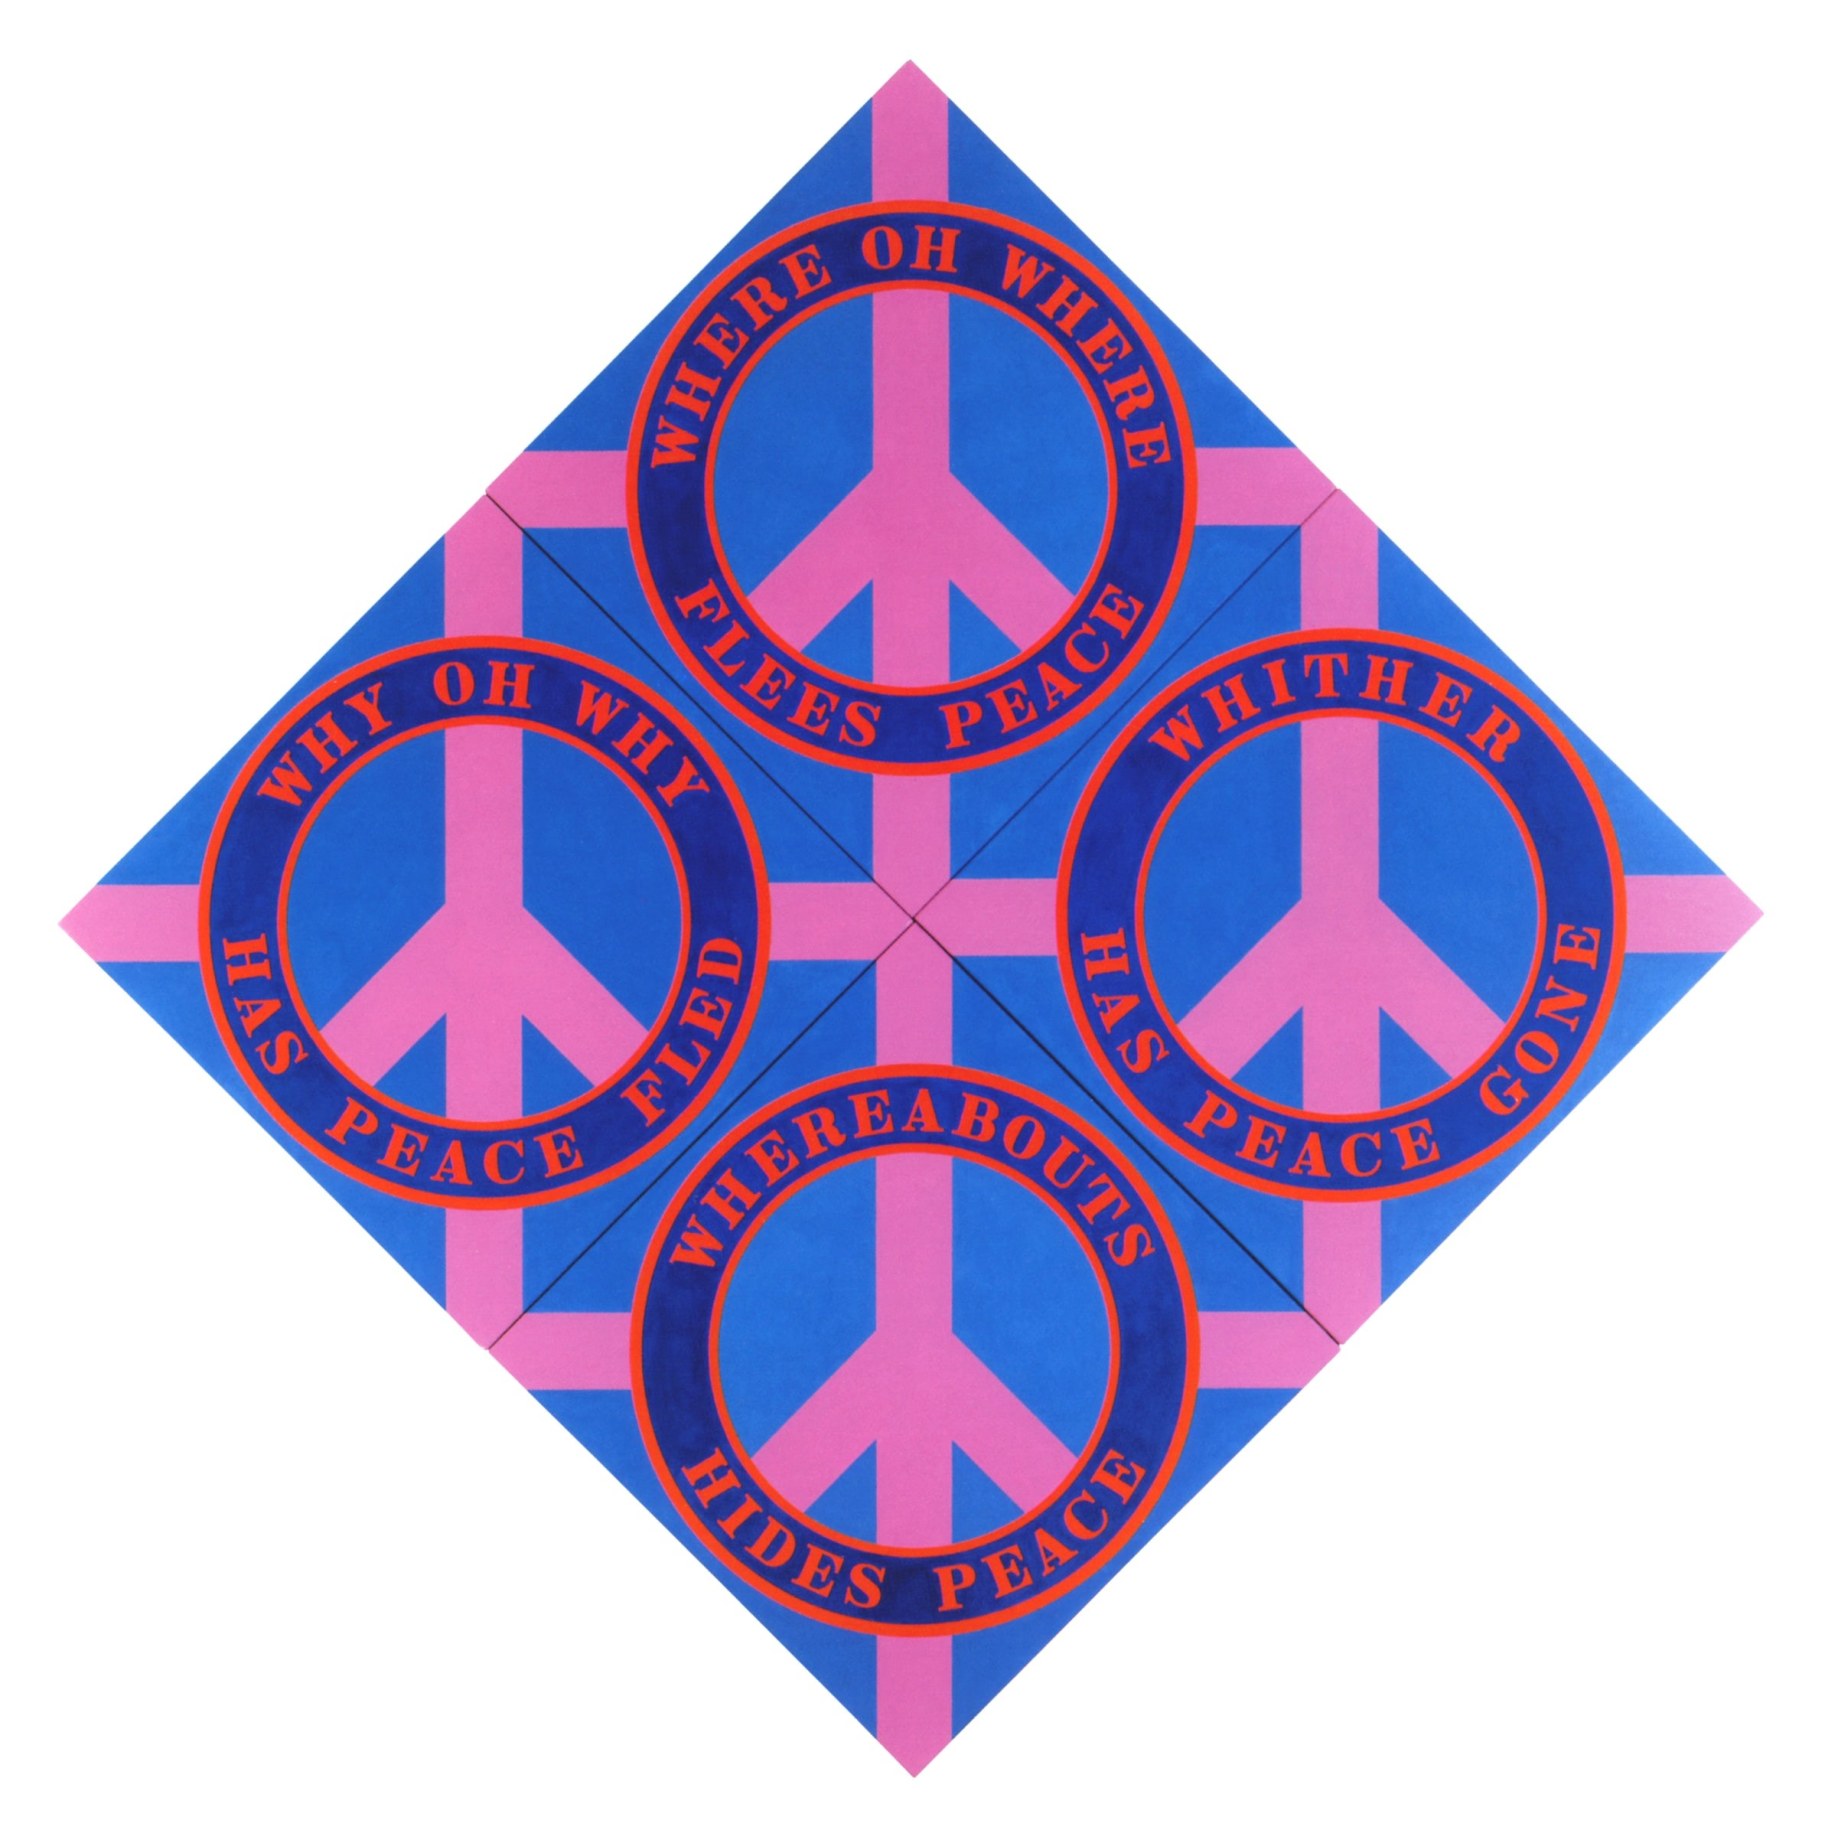 Four Diamond Peace, a diamond shaped painting comprised of four panels, measuring 101 by 101 inches overall. The panels have a blue ground, and each panel is dominated by a pink peace sign facing upwards surrounded by a dark blue ring with red outlines. The rings containing text in red, reading, clockwise from top: &quot;Where Oh Where Flees Peace,&quot; &quot;Whither Has Peace Gone,&quot; &quot;Whereabouts Hides Peace,&quot; and &quot;Why Oh Why Has Peace Fled.&quot; Pink bands have been painted from the edge of the ring to the corner of each panel.